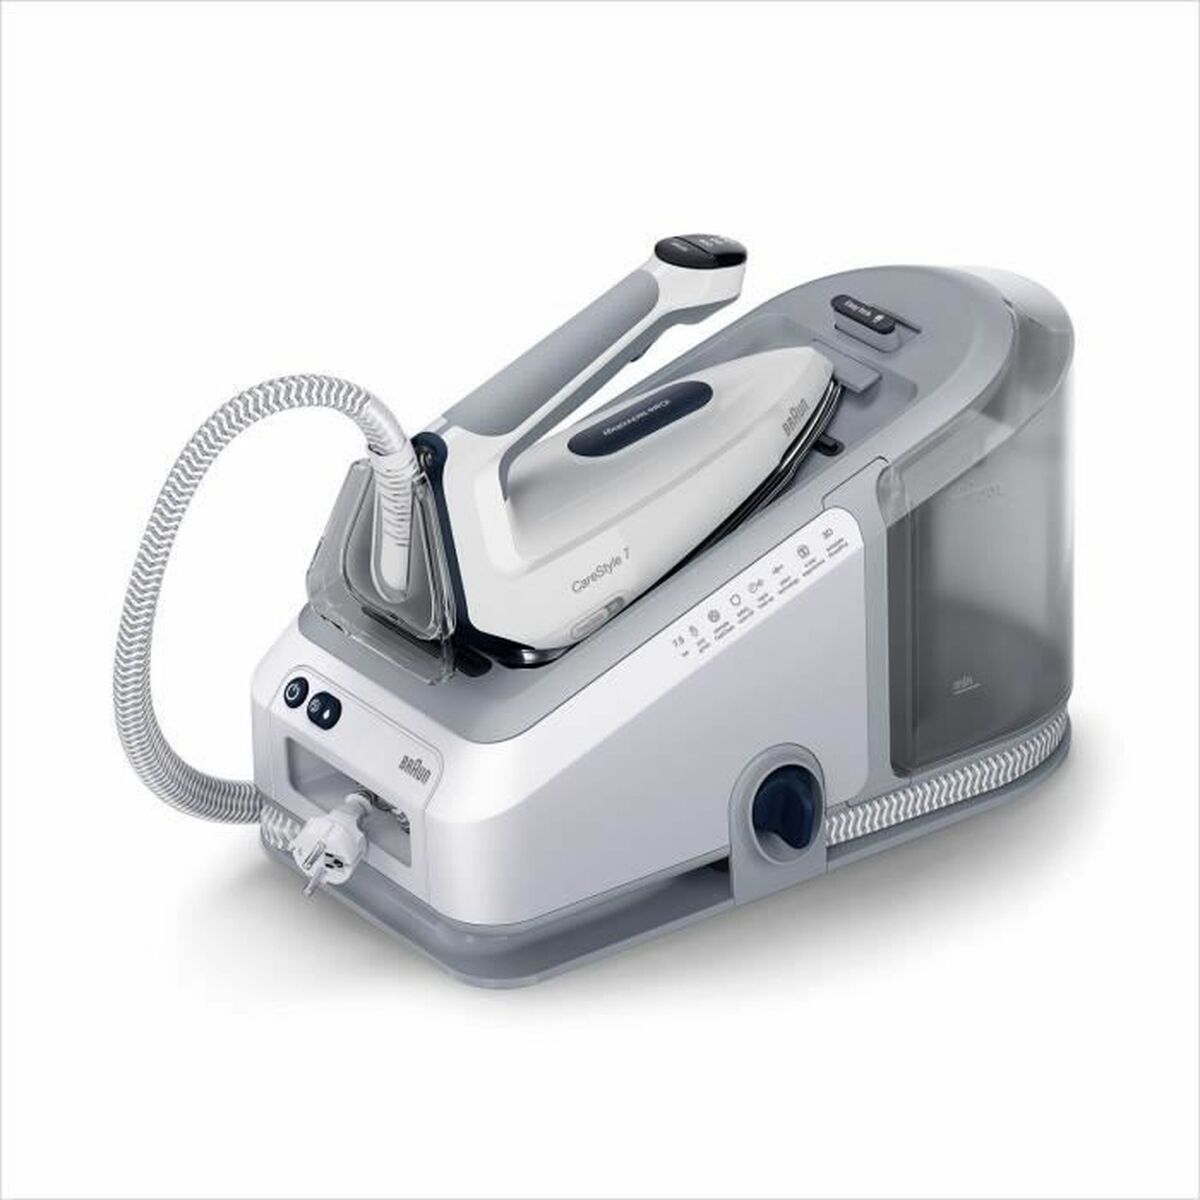 Vertical steam iron Braun IS7262 CARESTYLE 7 PRO 2700 W - buy, price,  reviews in Estonia